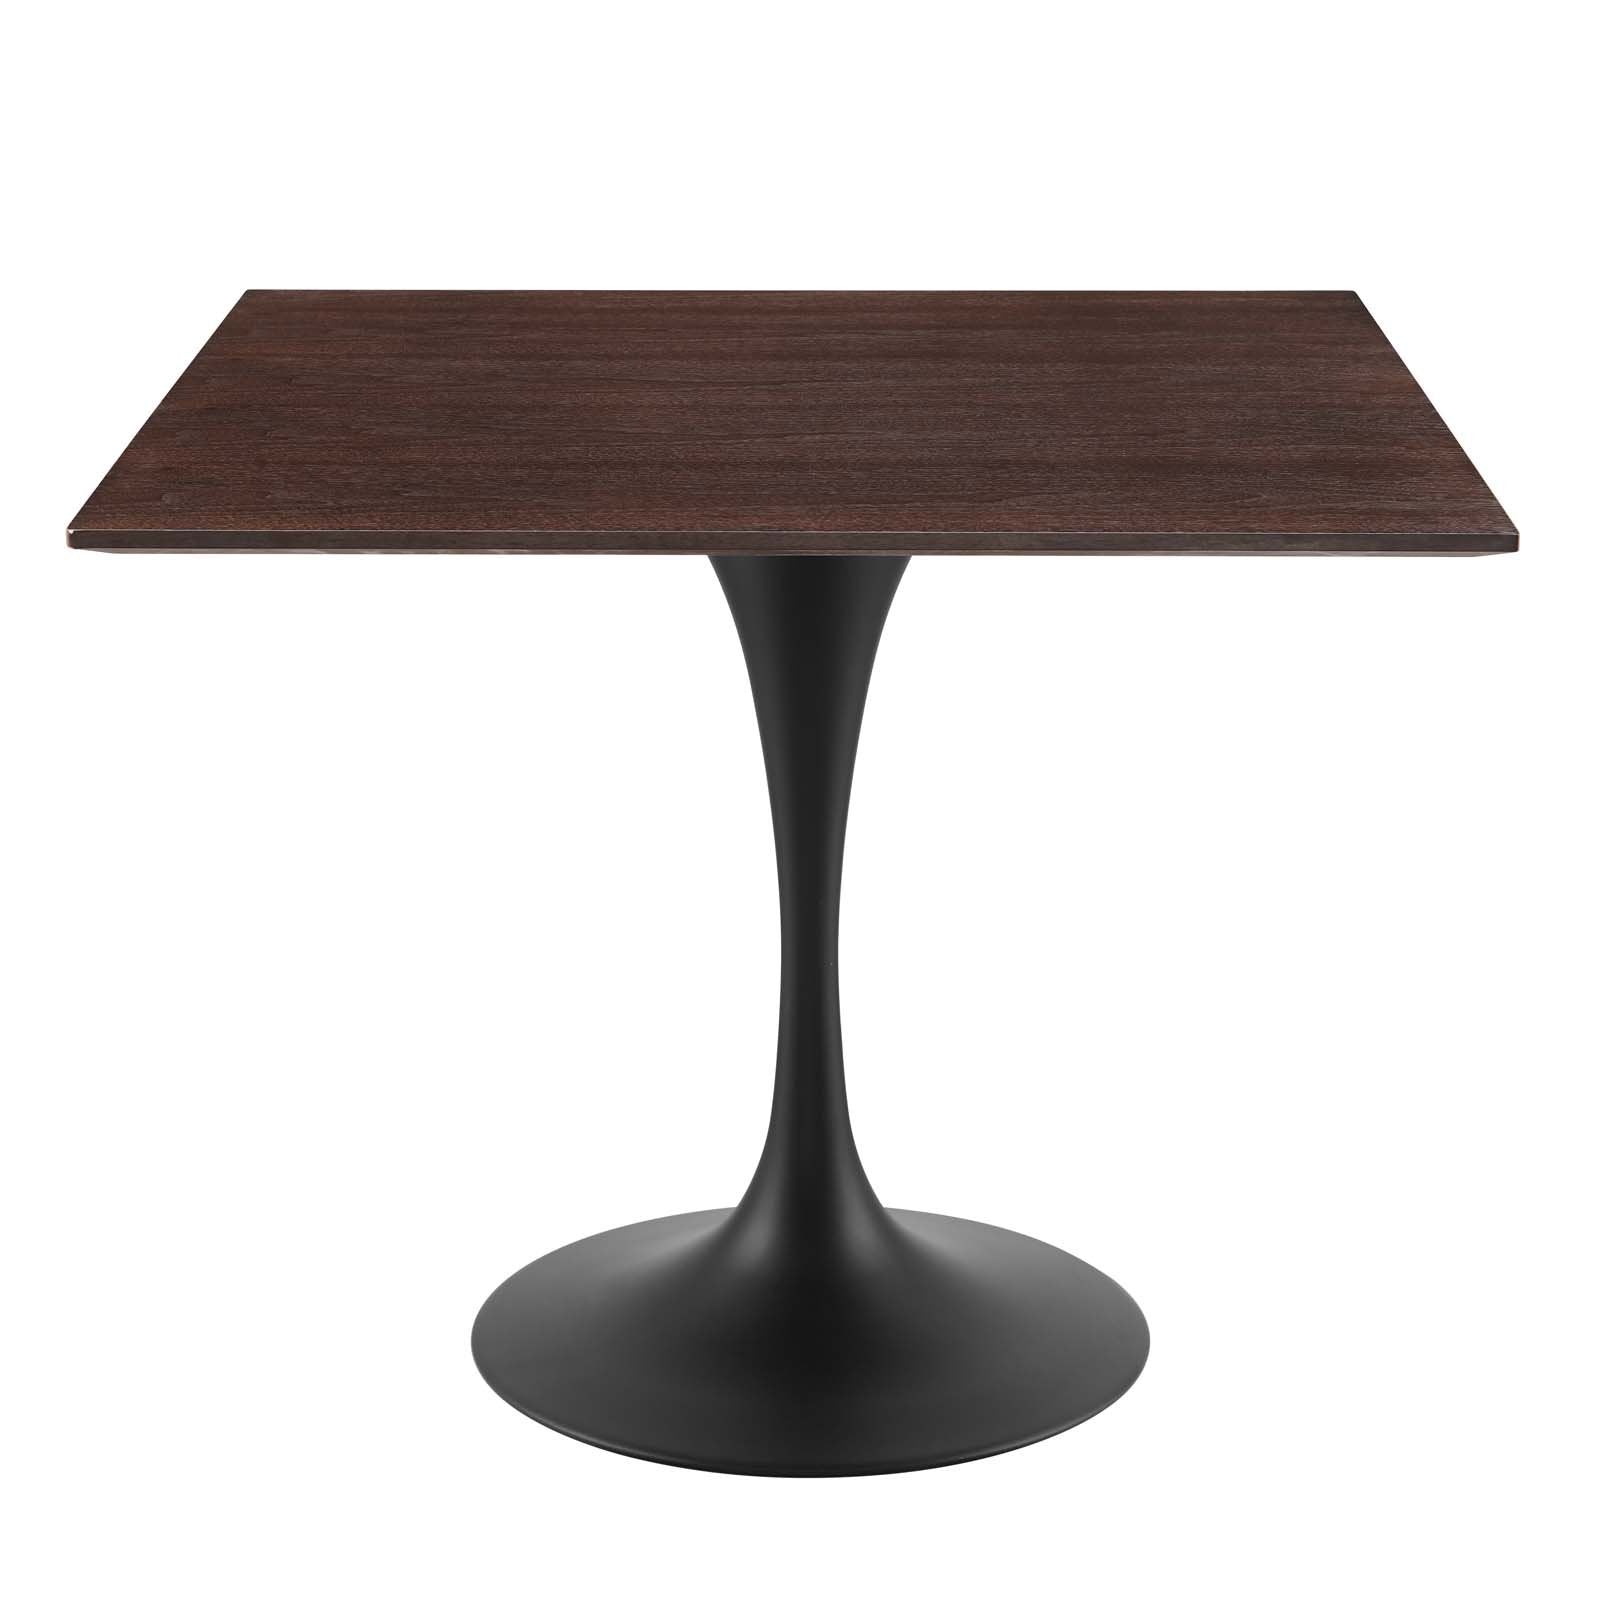 Lippa 36" Wood Square Dining Table - East Shore Modern Home Furnishings